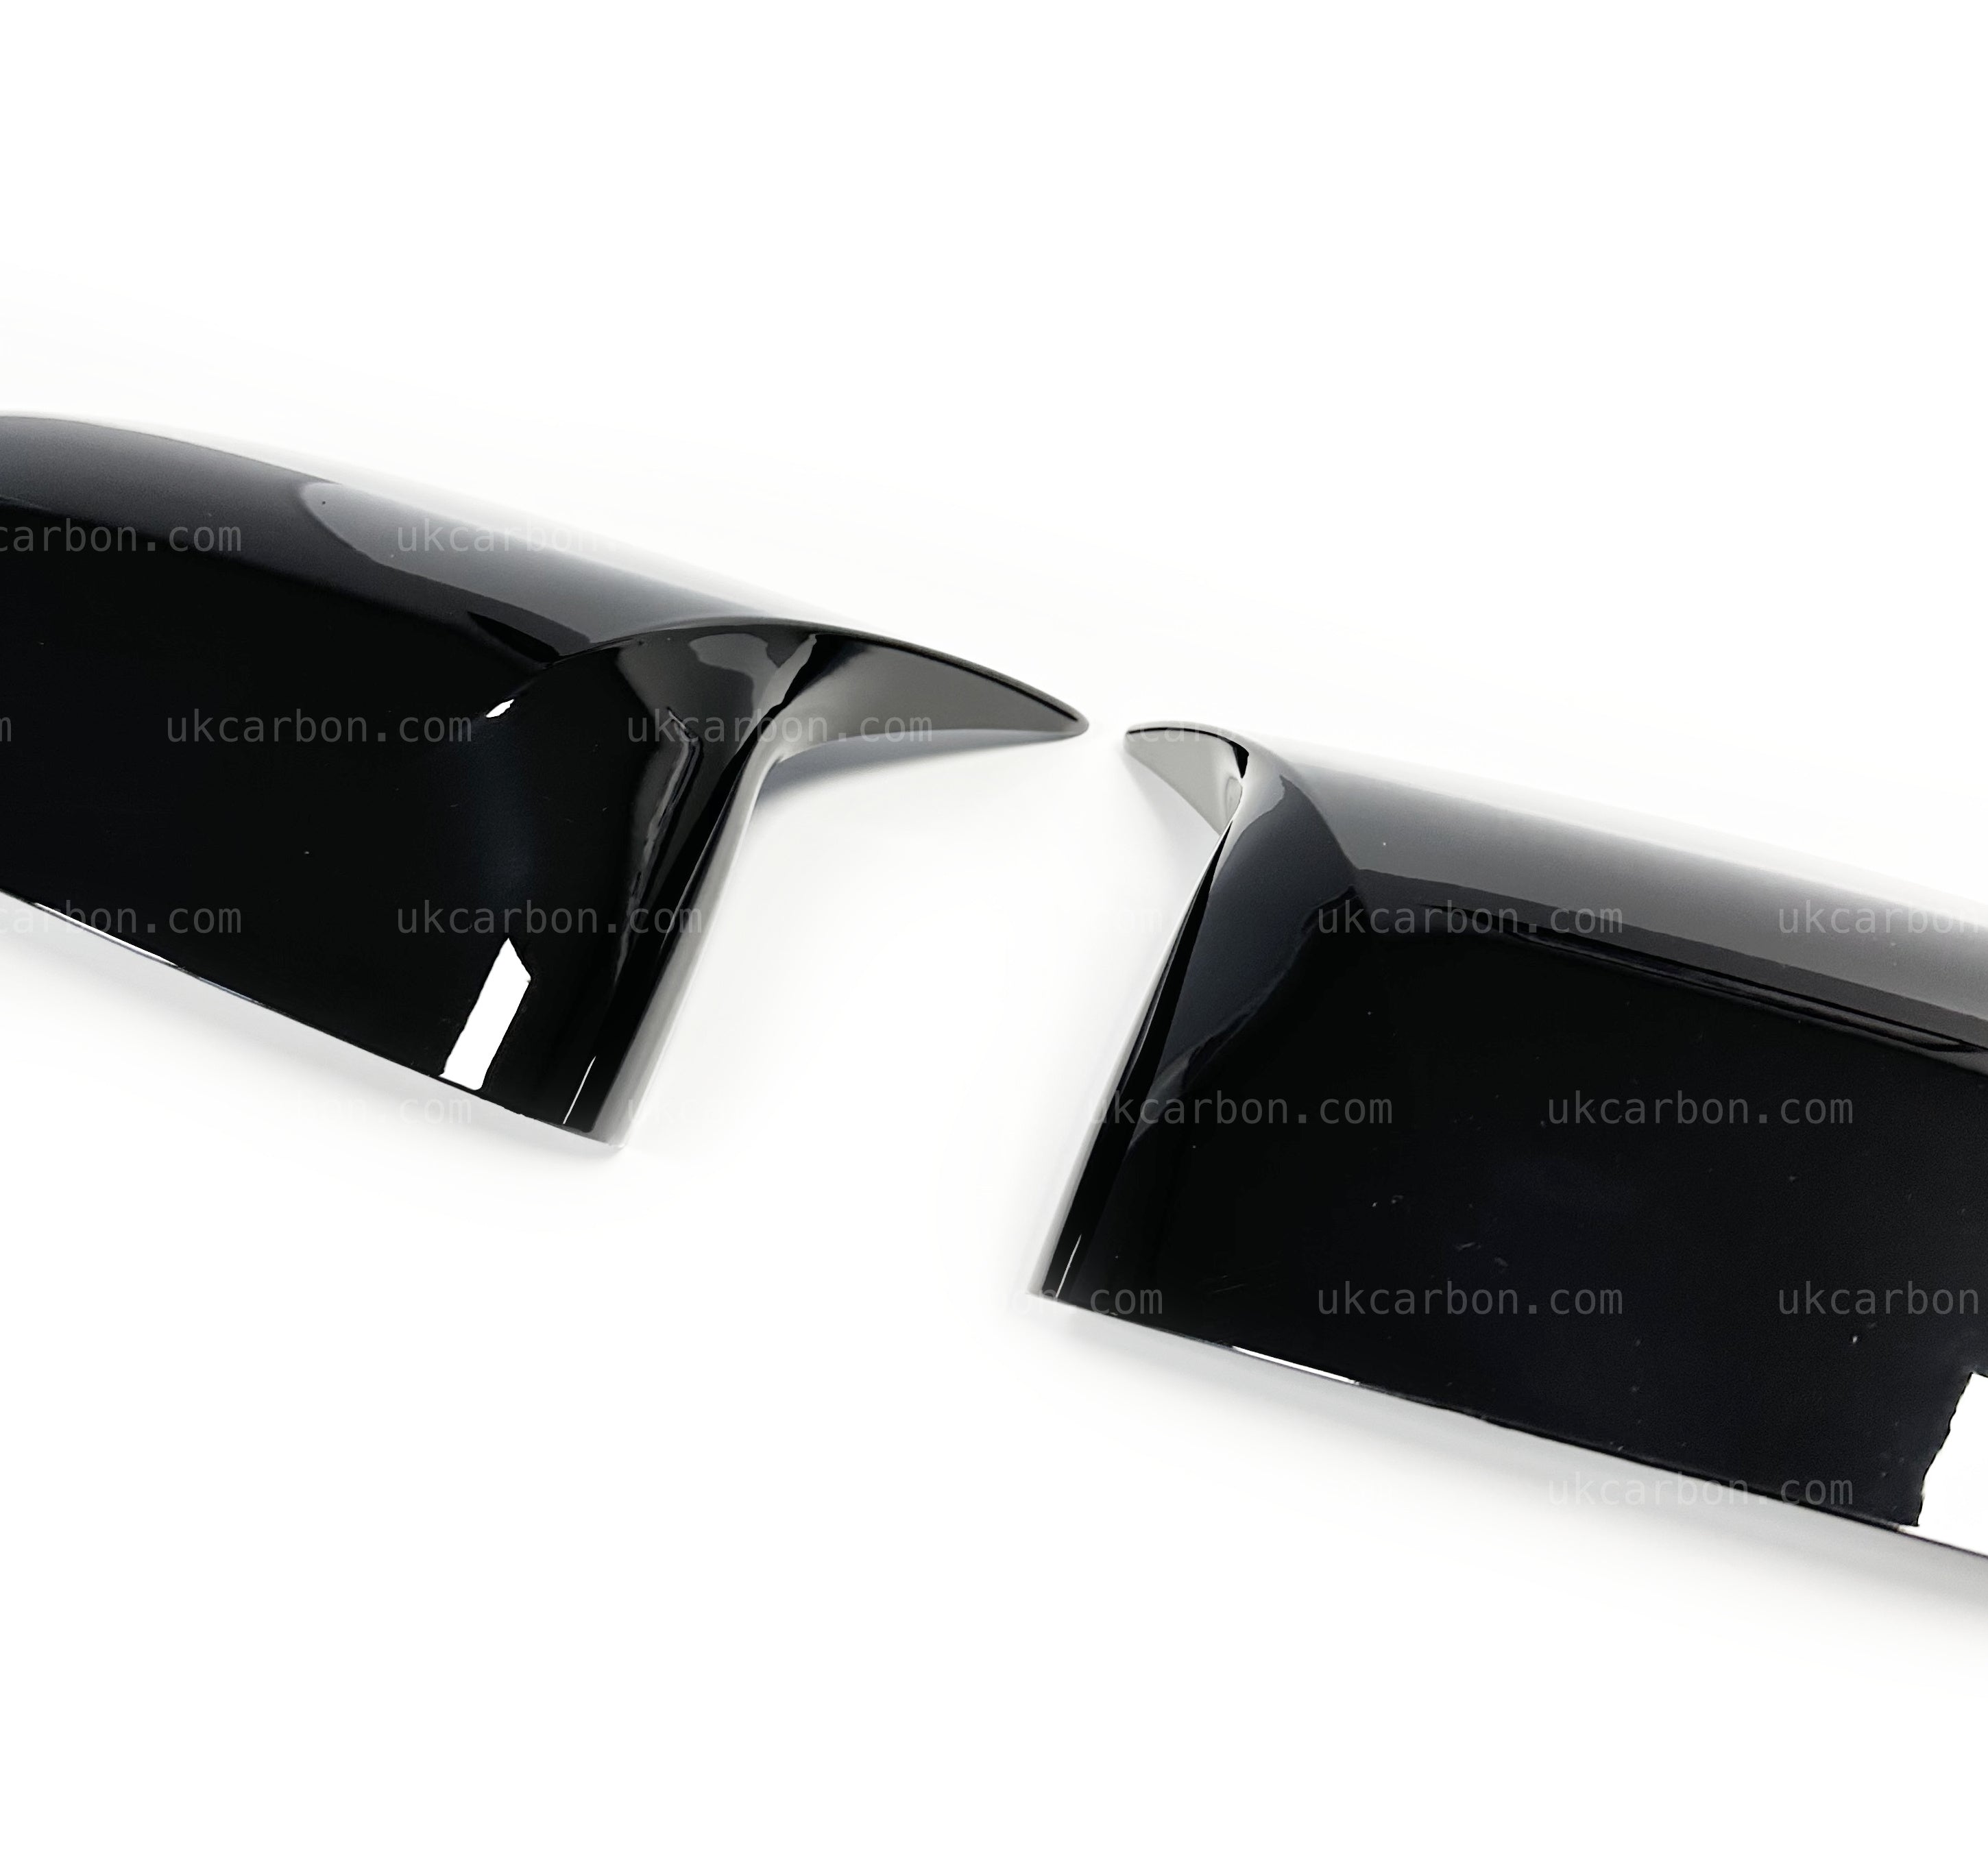 BMW X3 X4 Gloss Black M Style Wing Mirror Cover Replacement G01 G02 by UKCarbon